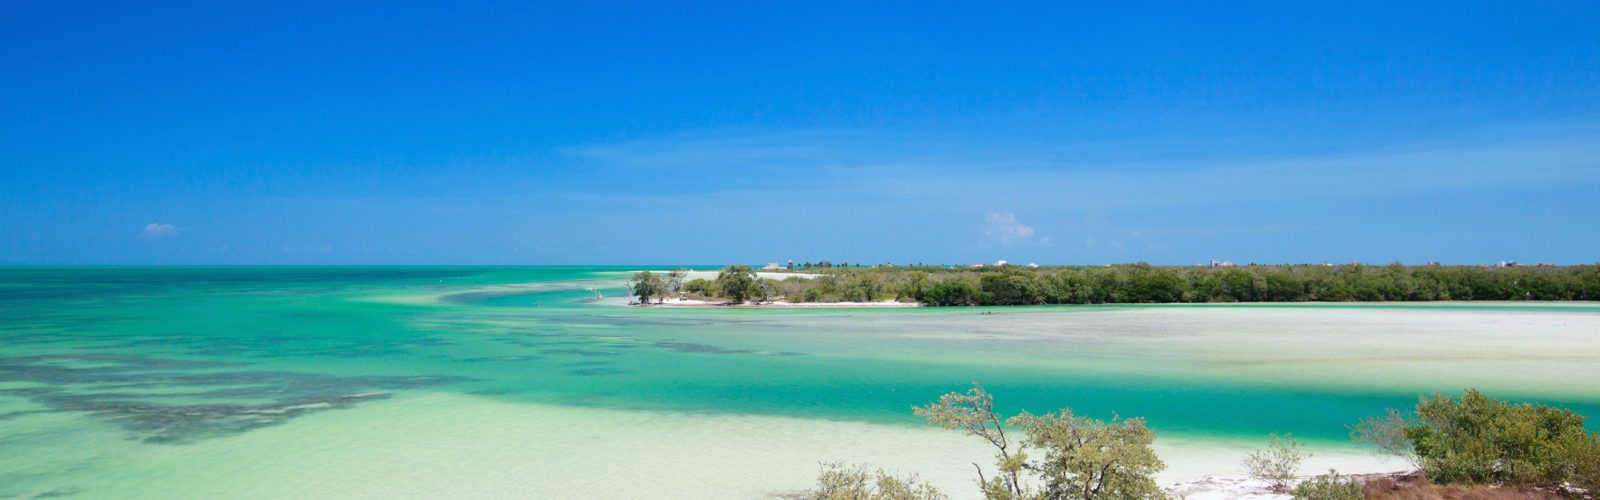 Panoramic view of Holbox Island, Mexico